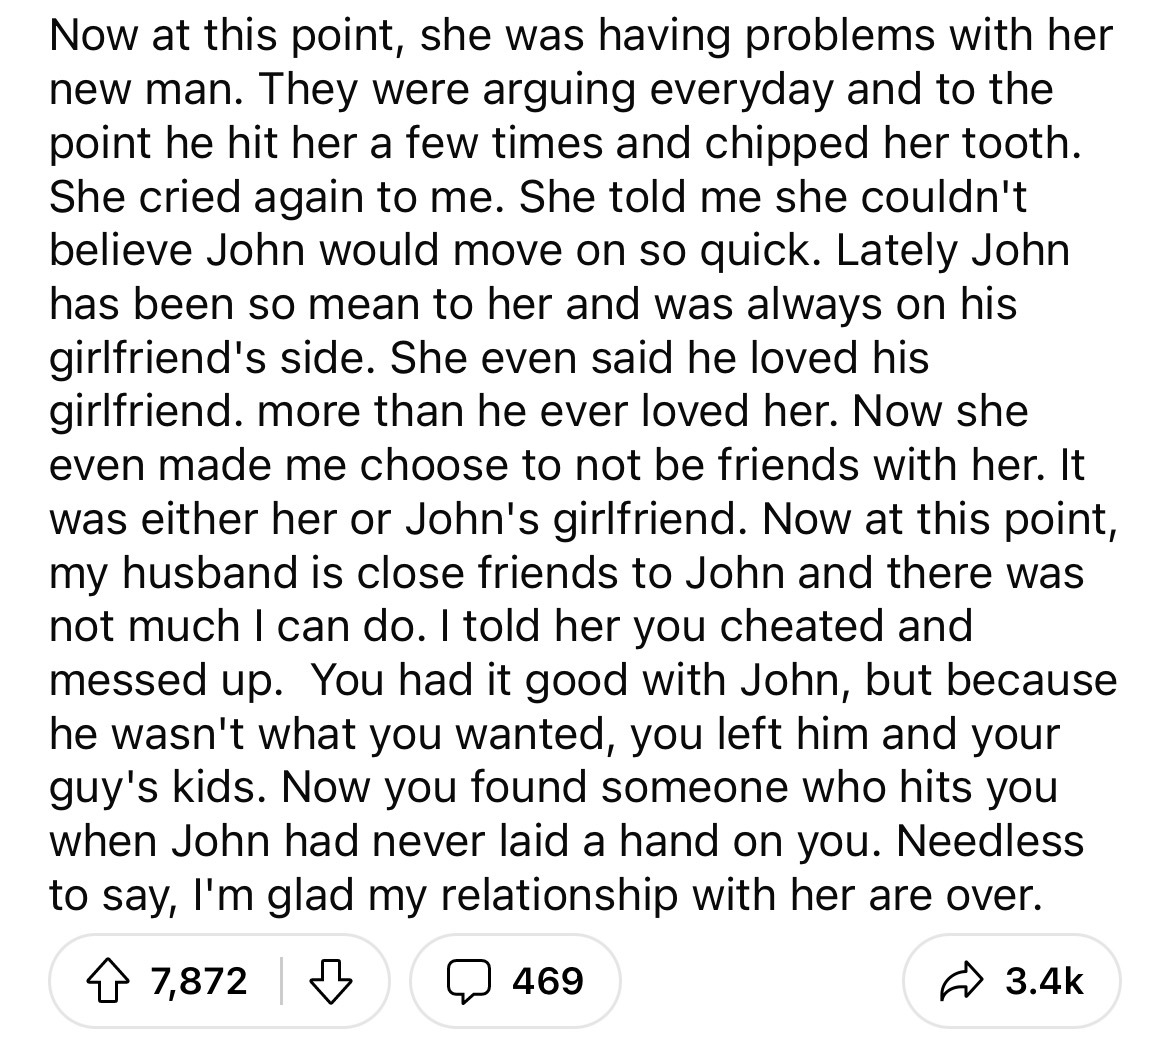 got up in the middle - Now at this point, she was having problems with her new man. They were arguing everyday and to the point he hit her a few times and chipped her tooth. She cried again to me. She told me she couldn't believe John would move on so qui